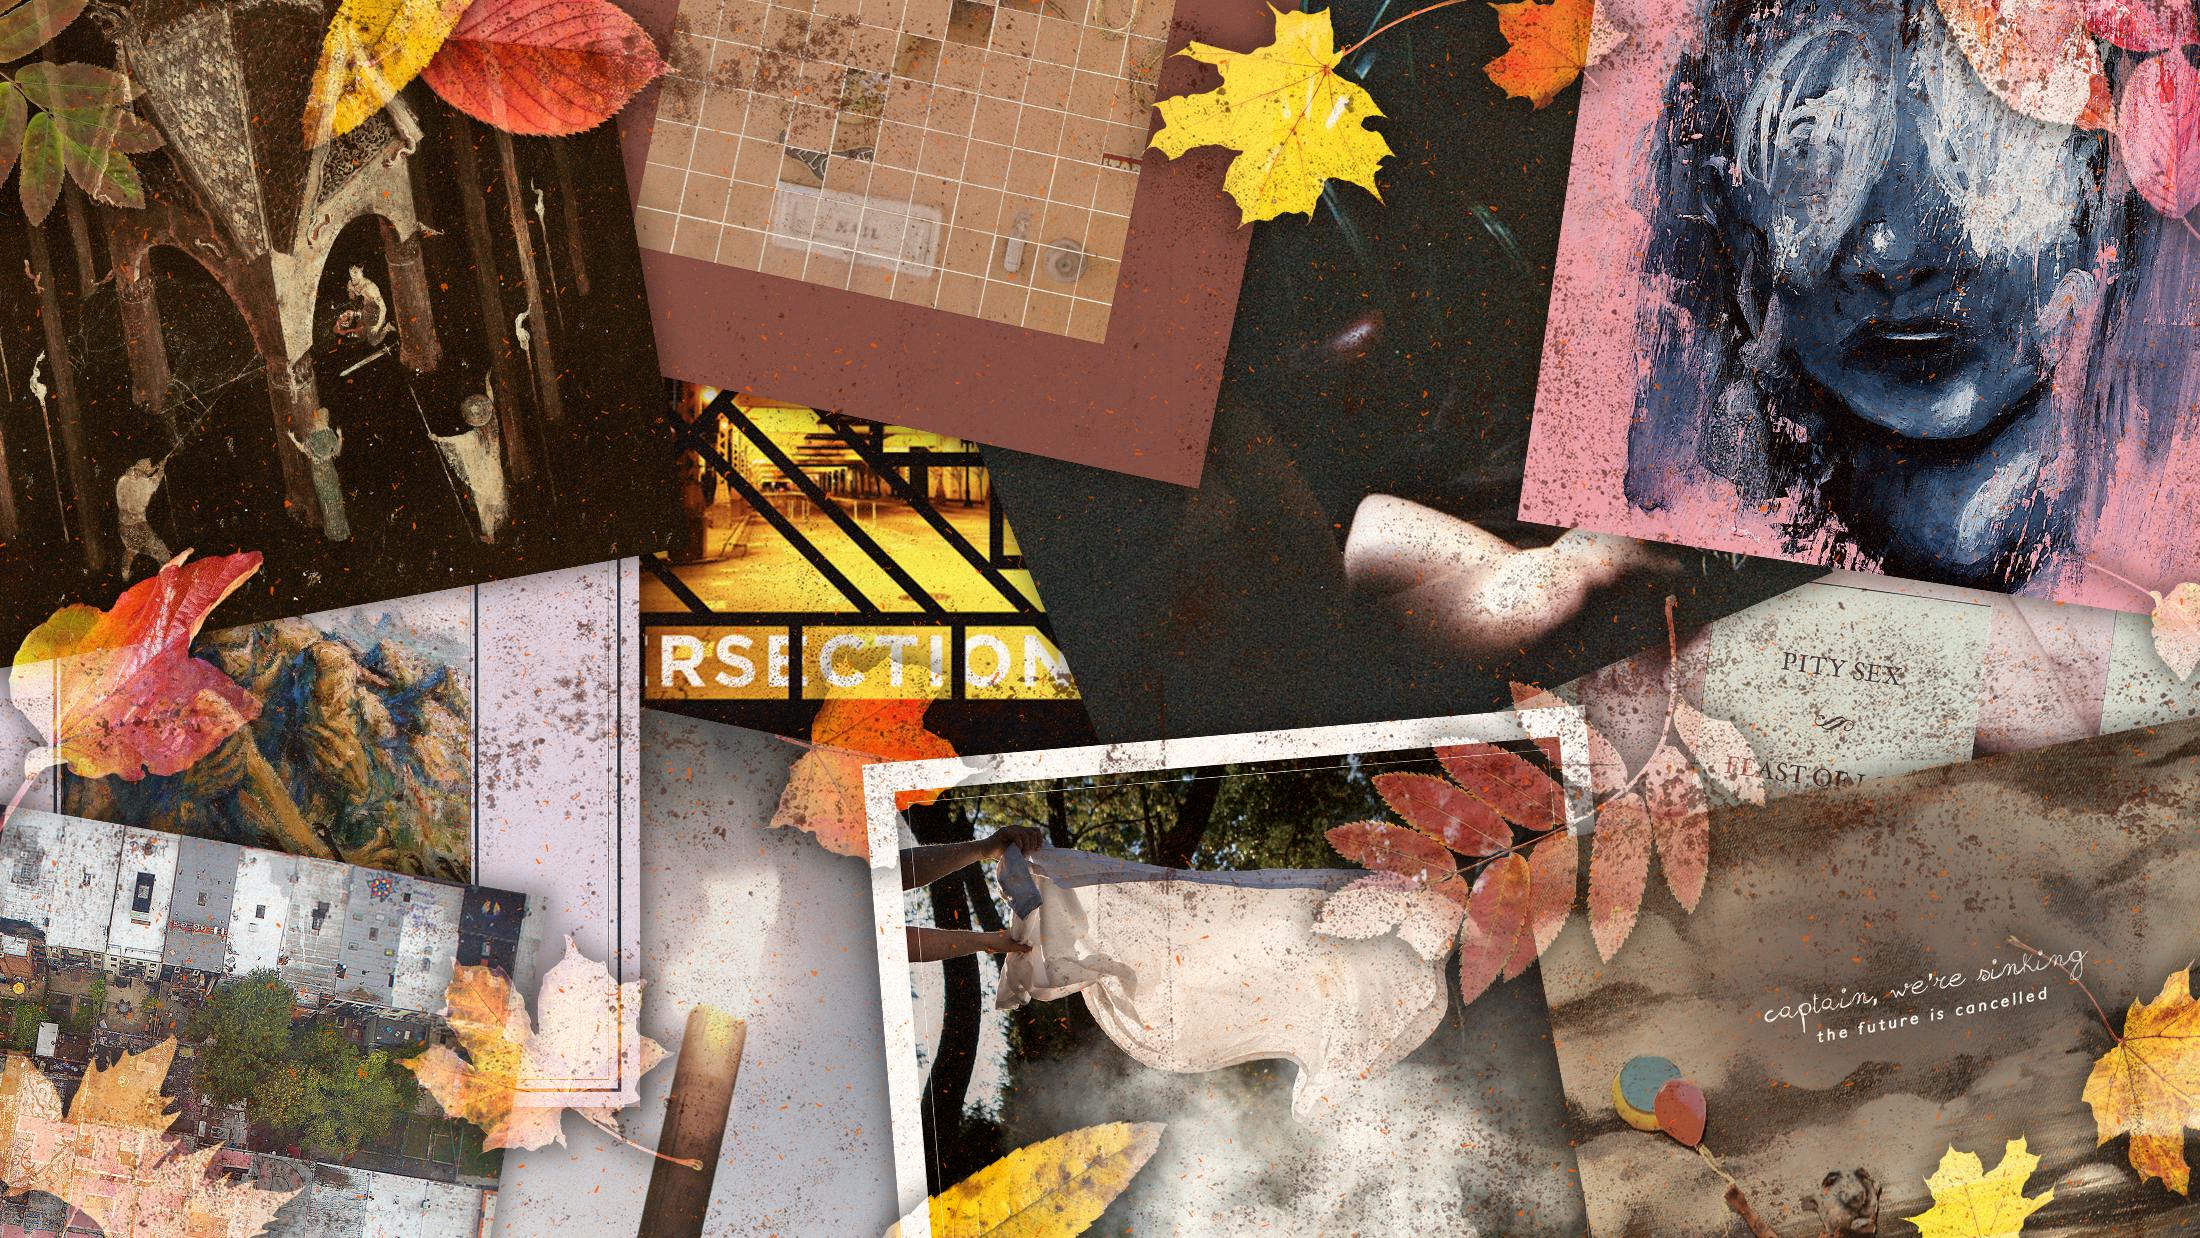 18 albums that are perfect for autumn listening